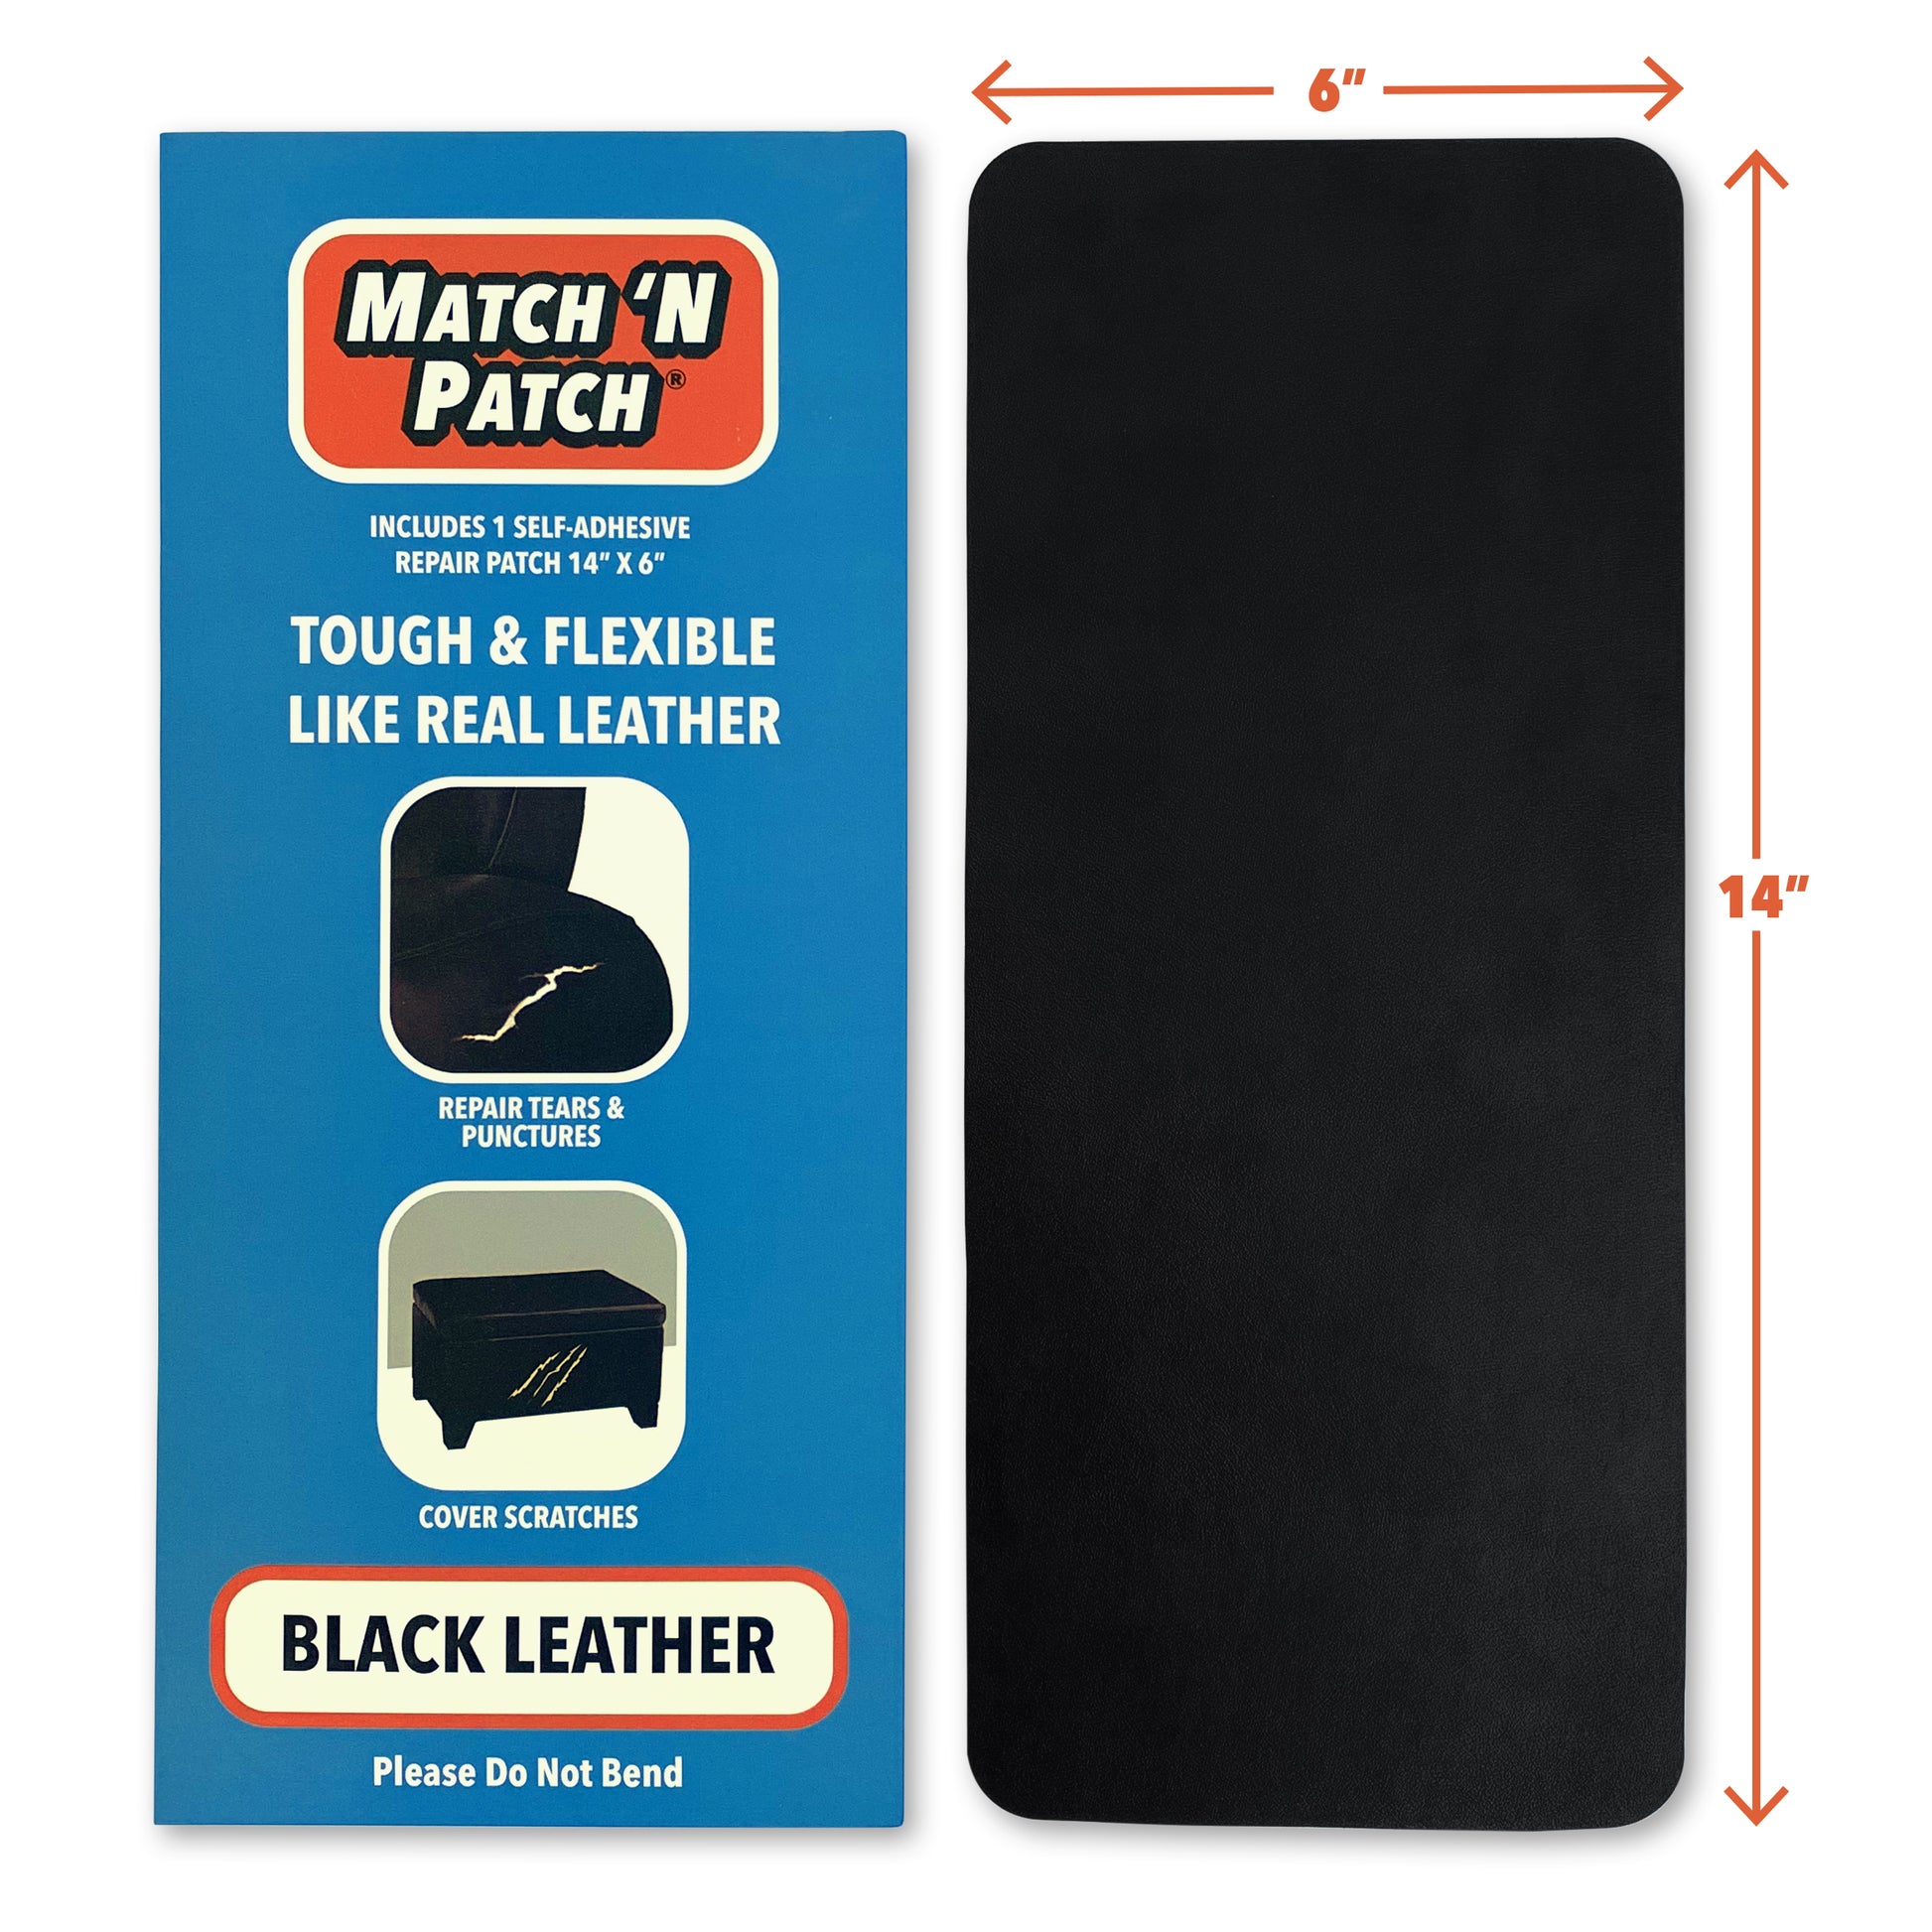 14x6 Inch Self-Adhesive Black Leather Repair Patch – Match 'N Patch